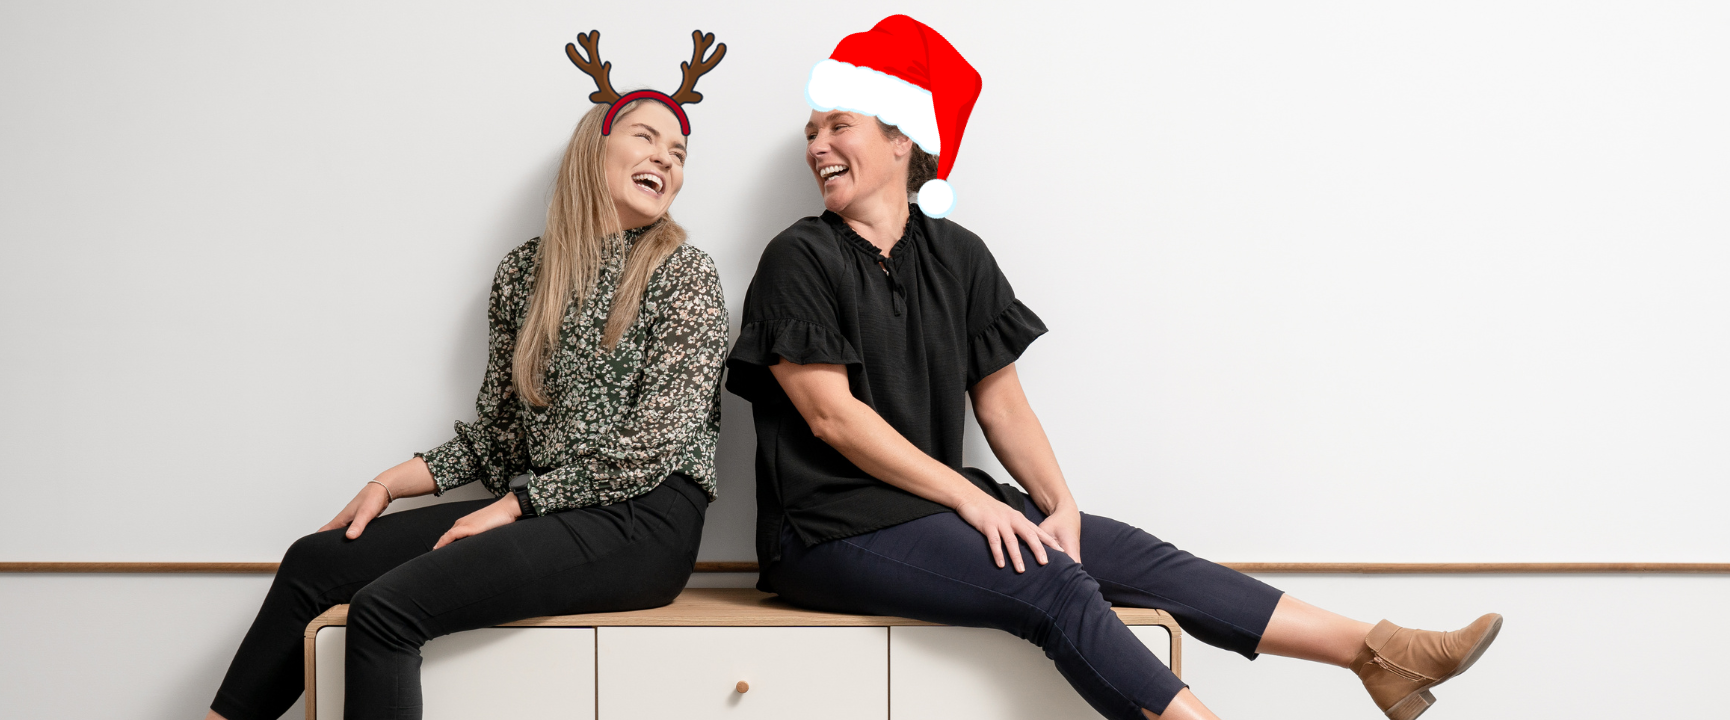 Sarah and Beck sit back to back on against a white wall. They are laughing and looking at each other. Sarah has cartoon reindeer antlers on her head. Beck has a cartoon santa hat, both of which have been edited on. 